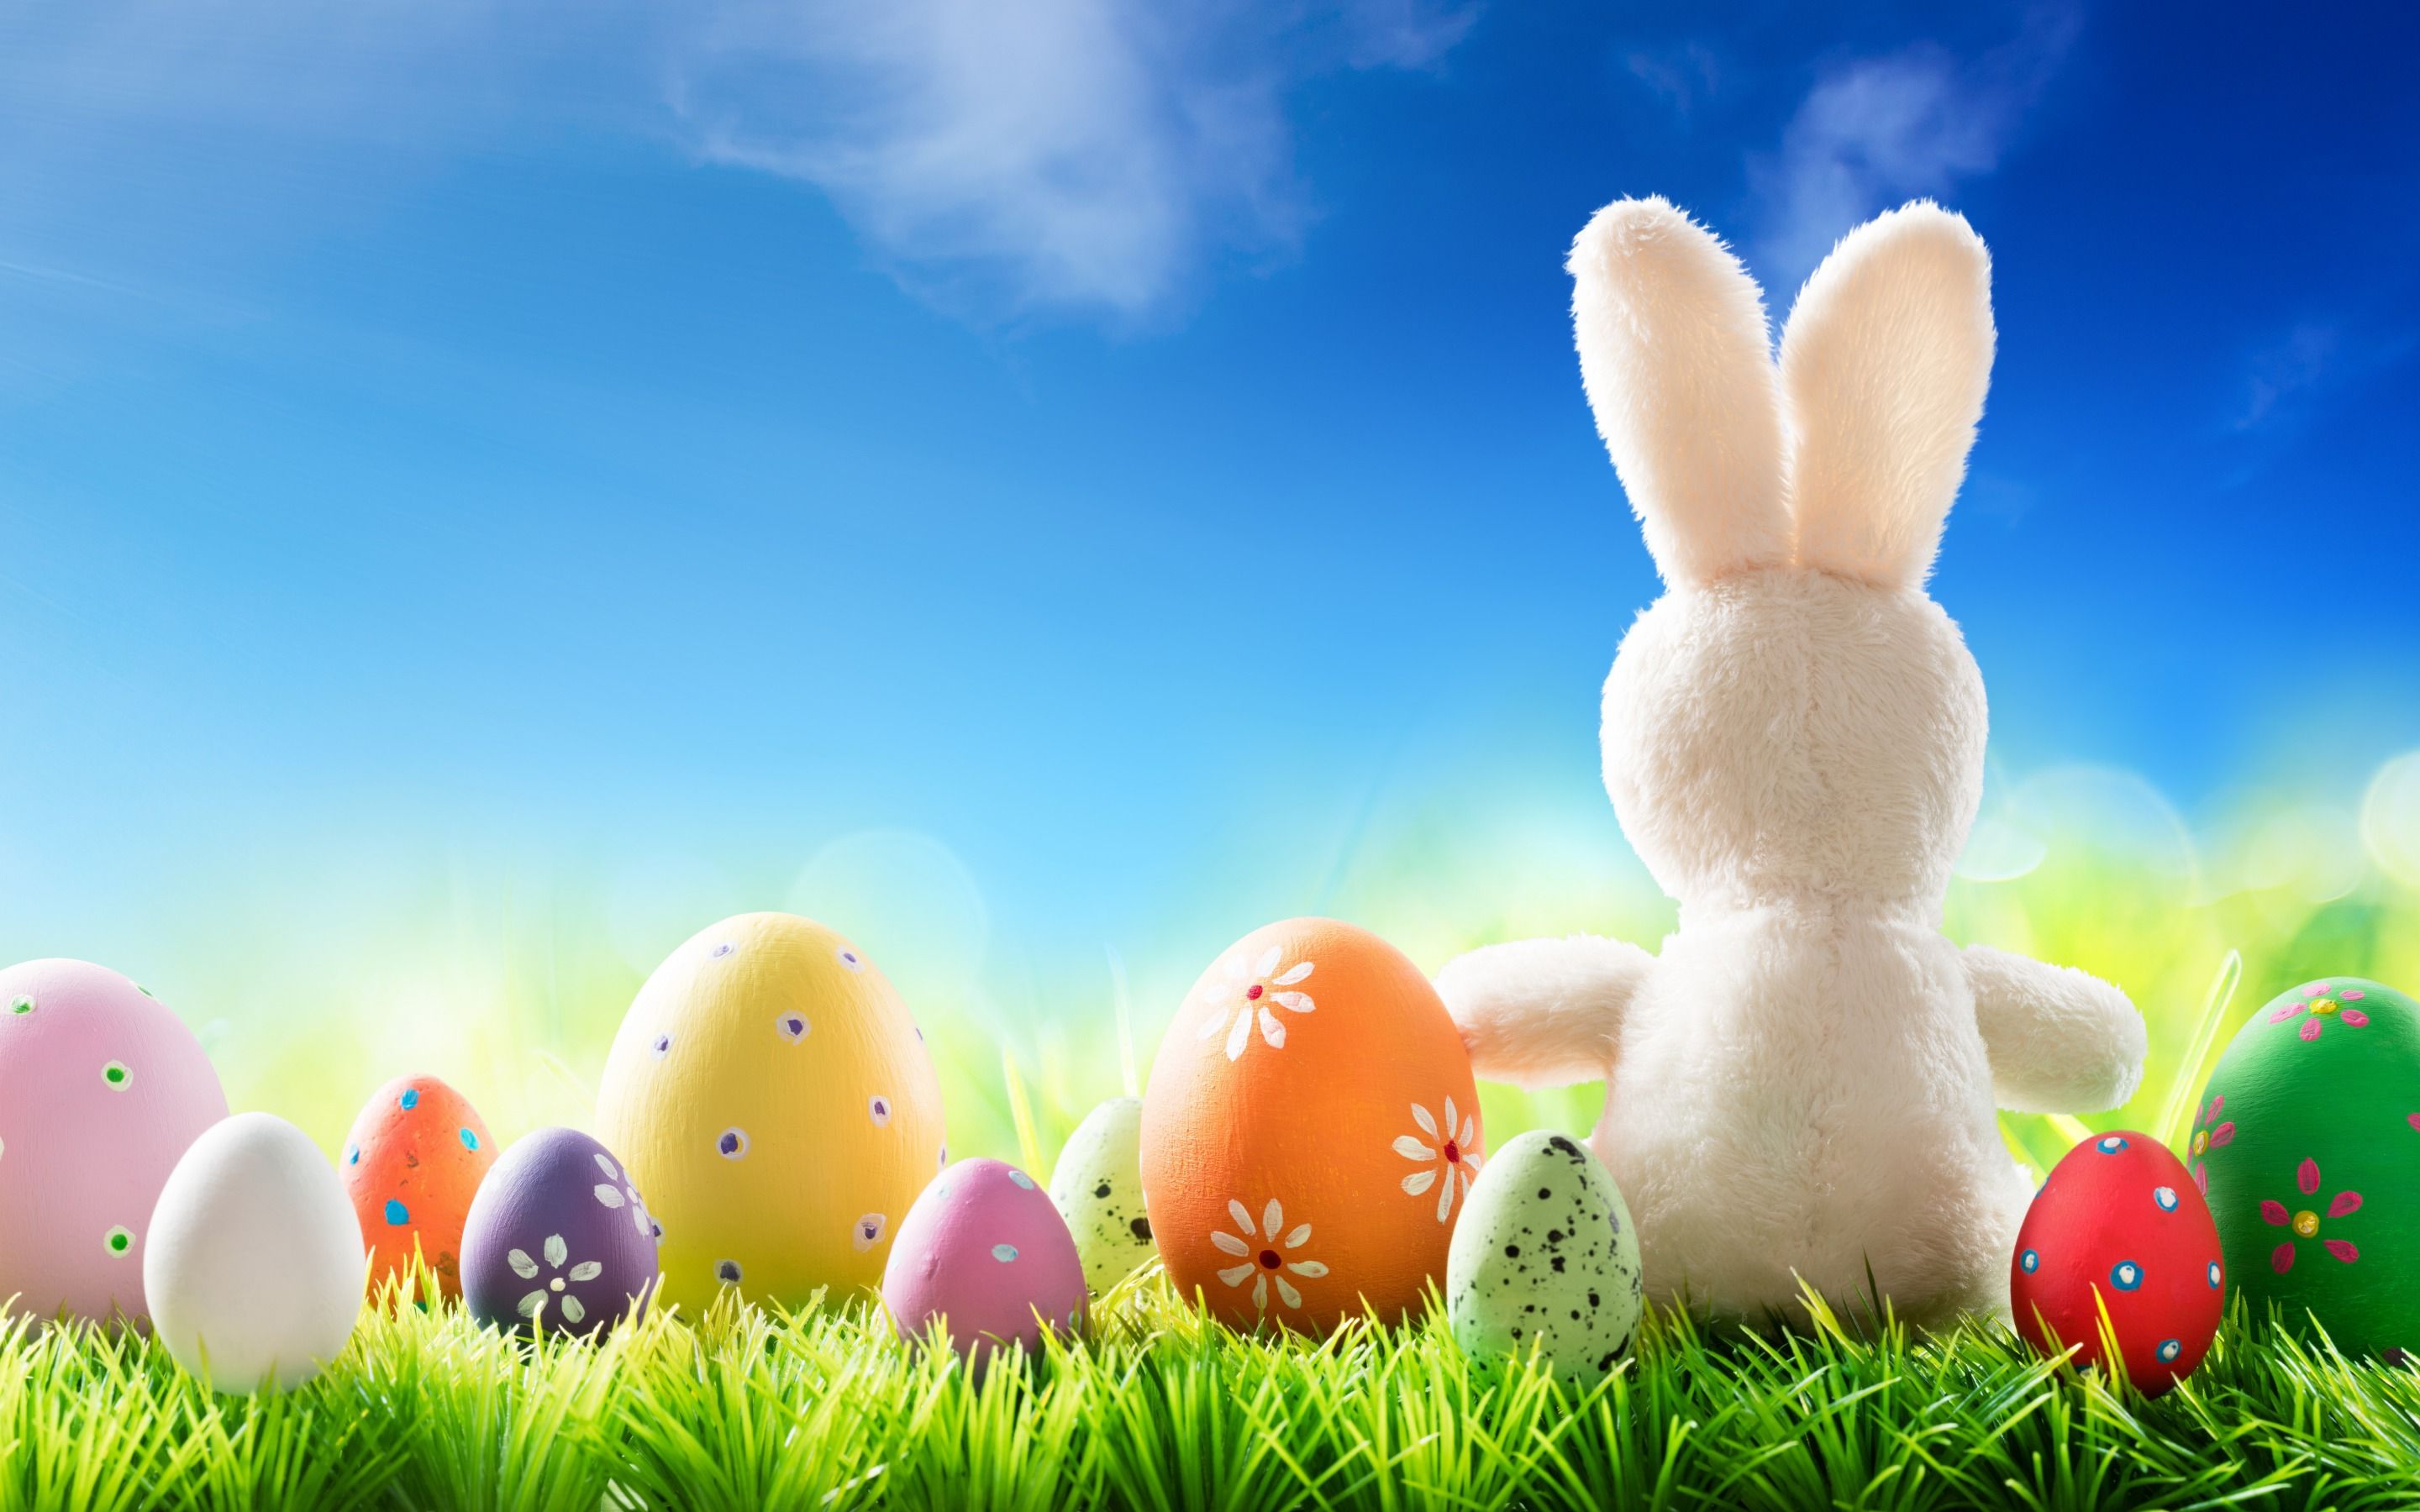 Download wallpaper Easter eggs, white rabbit, spring, colorful Easter eggs, Easter, green grass, decoration for desktop with resolution 2880x1800. High Quality HD picture wallpaper